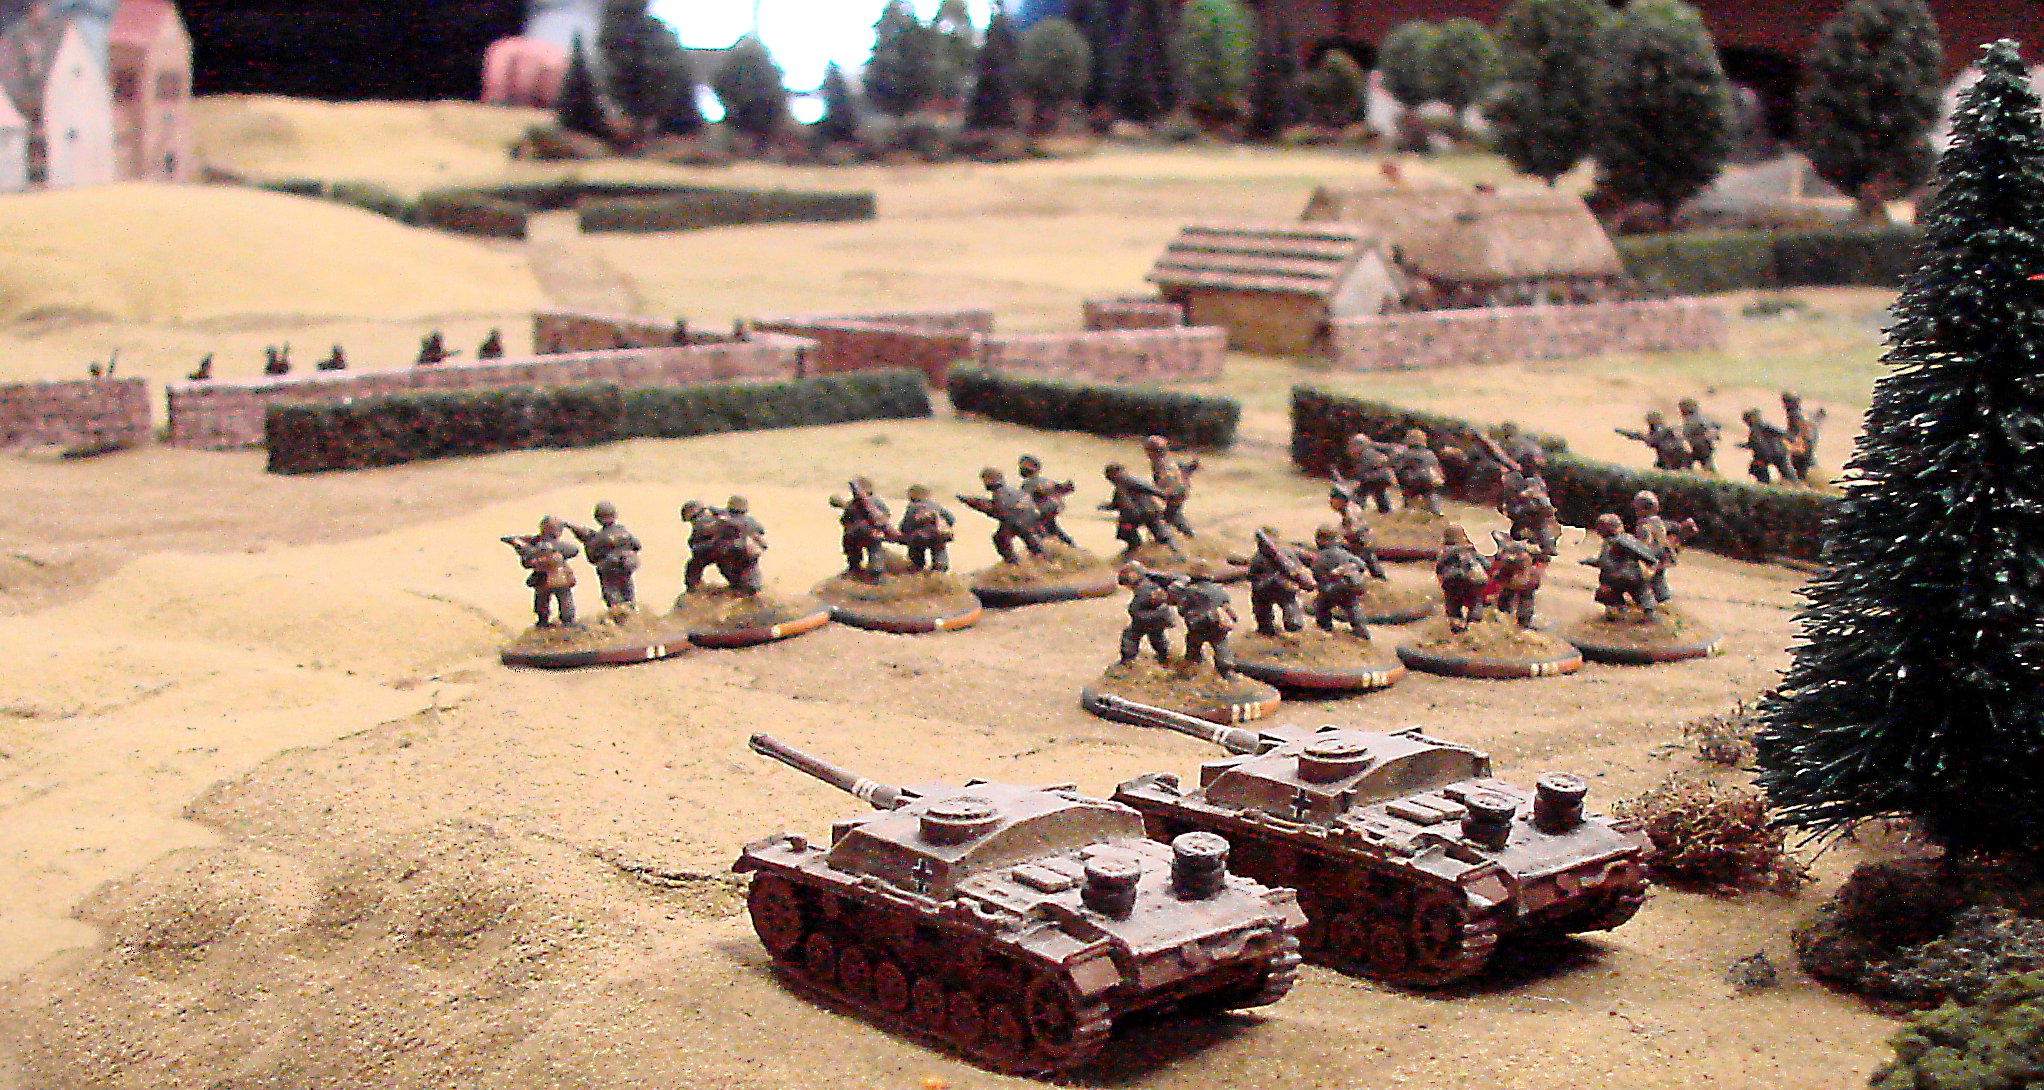 On the left flank, an advancing platoon is supported by a couple SturmGeschutzen.